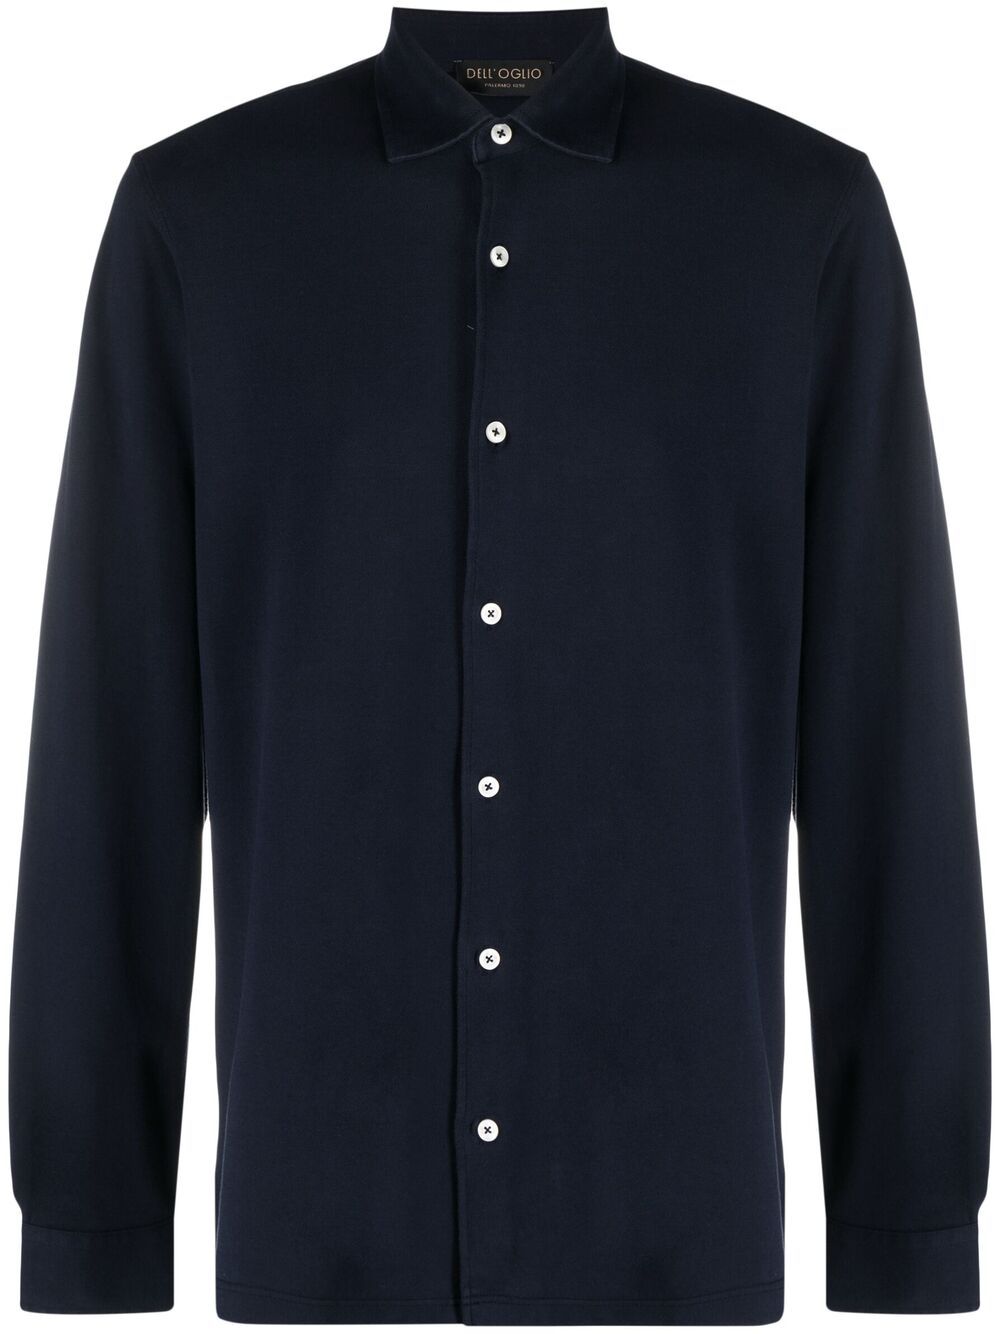 DELL'OGLIO BUTTON-UP LONG-SLEEVED SHIRT